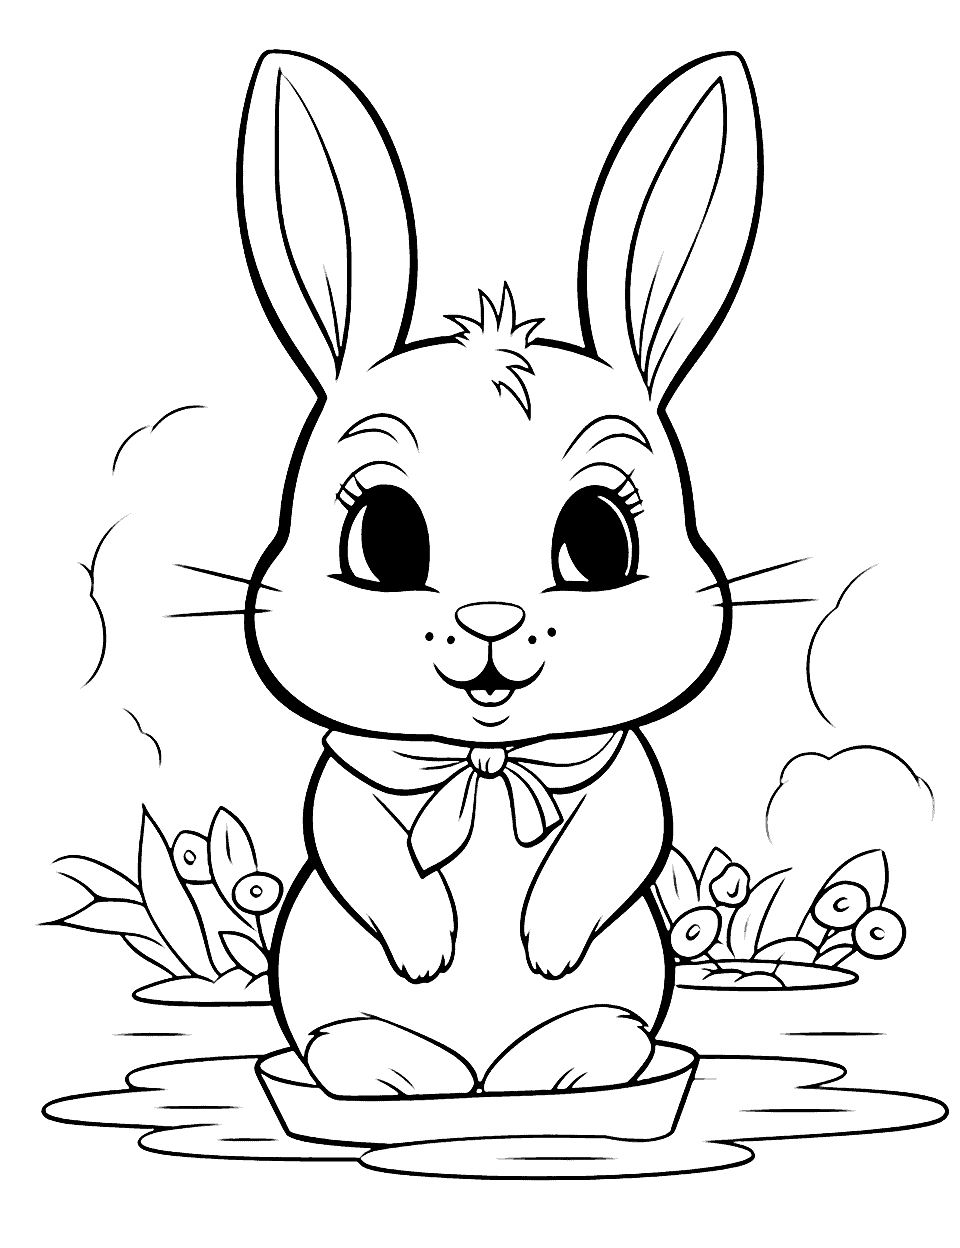 Rabbit bunny coloring pages free printables